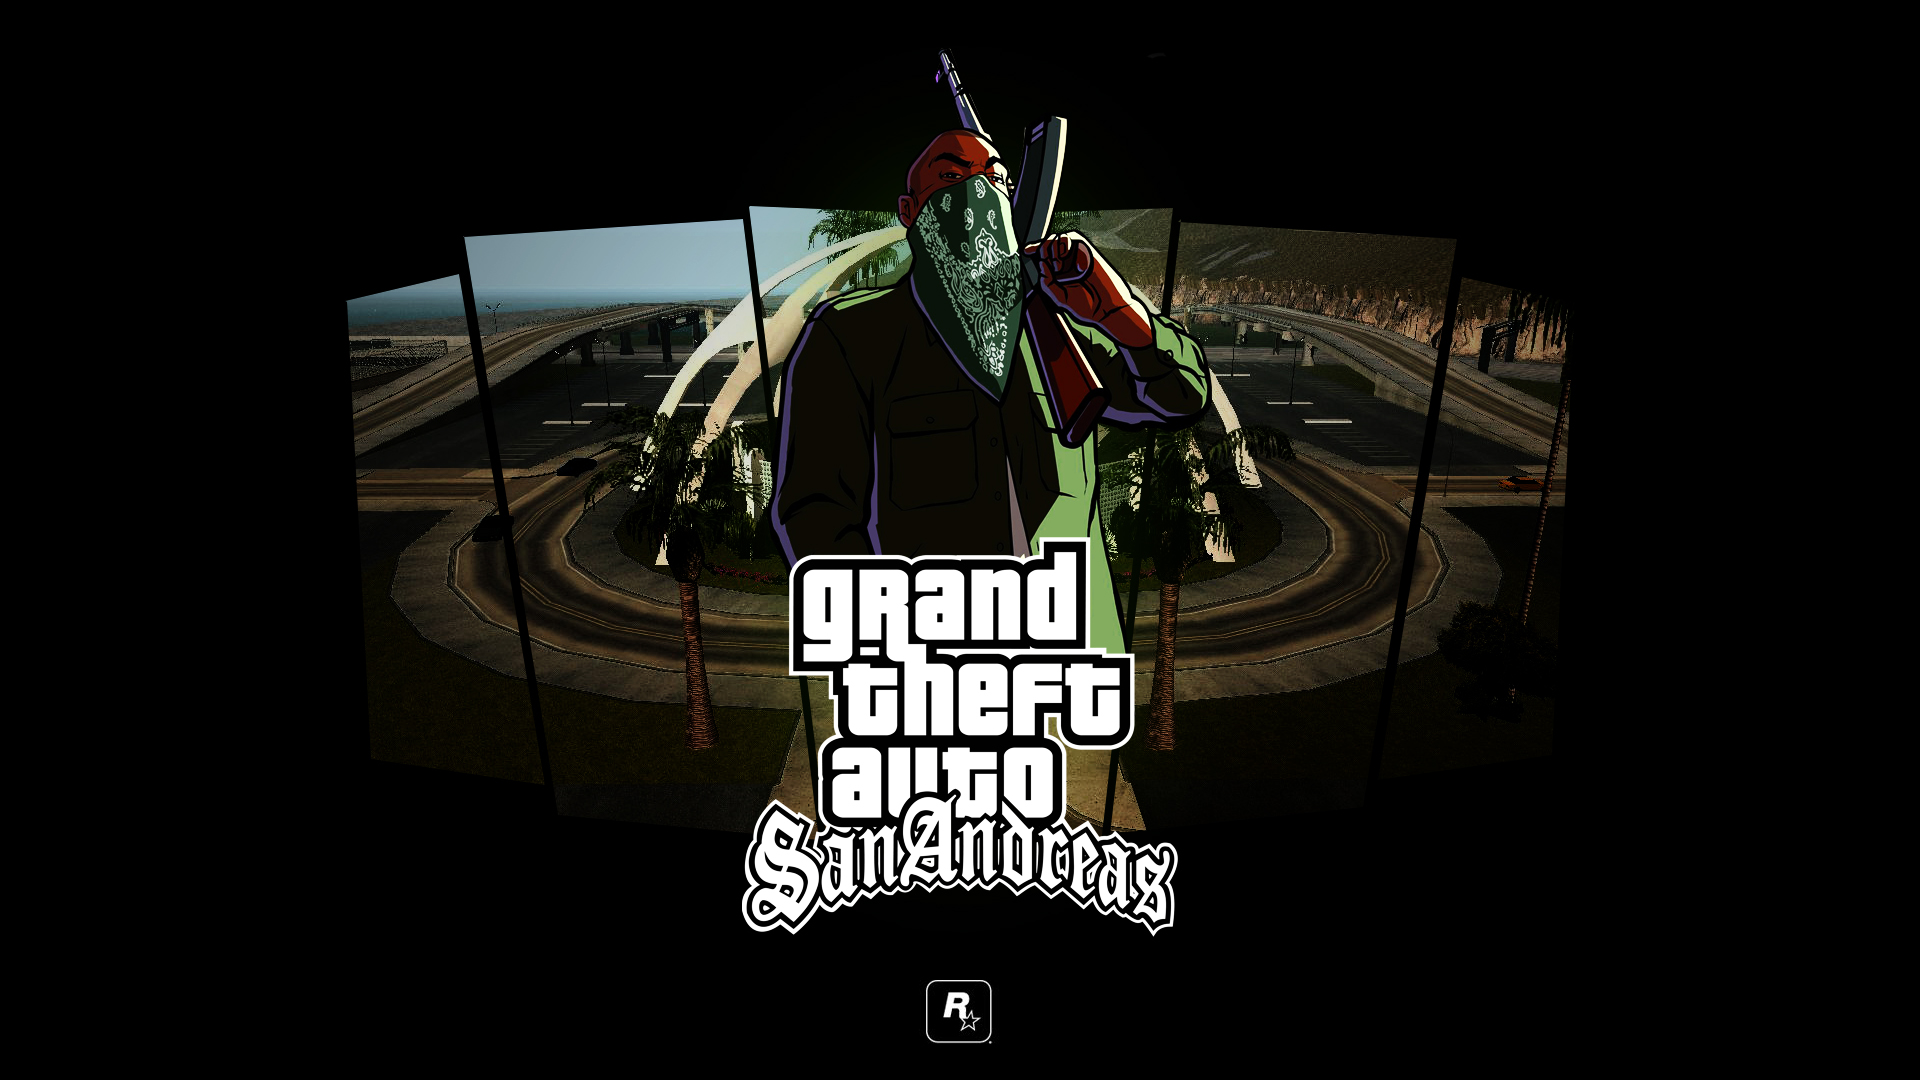 By Stephen Ments Off On Grand Theft Auto San Andreas Wallpaper